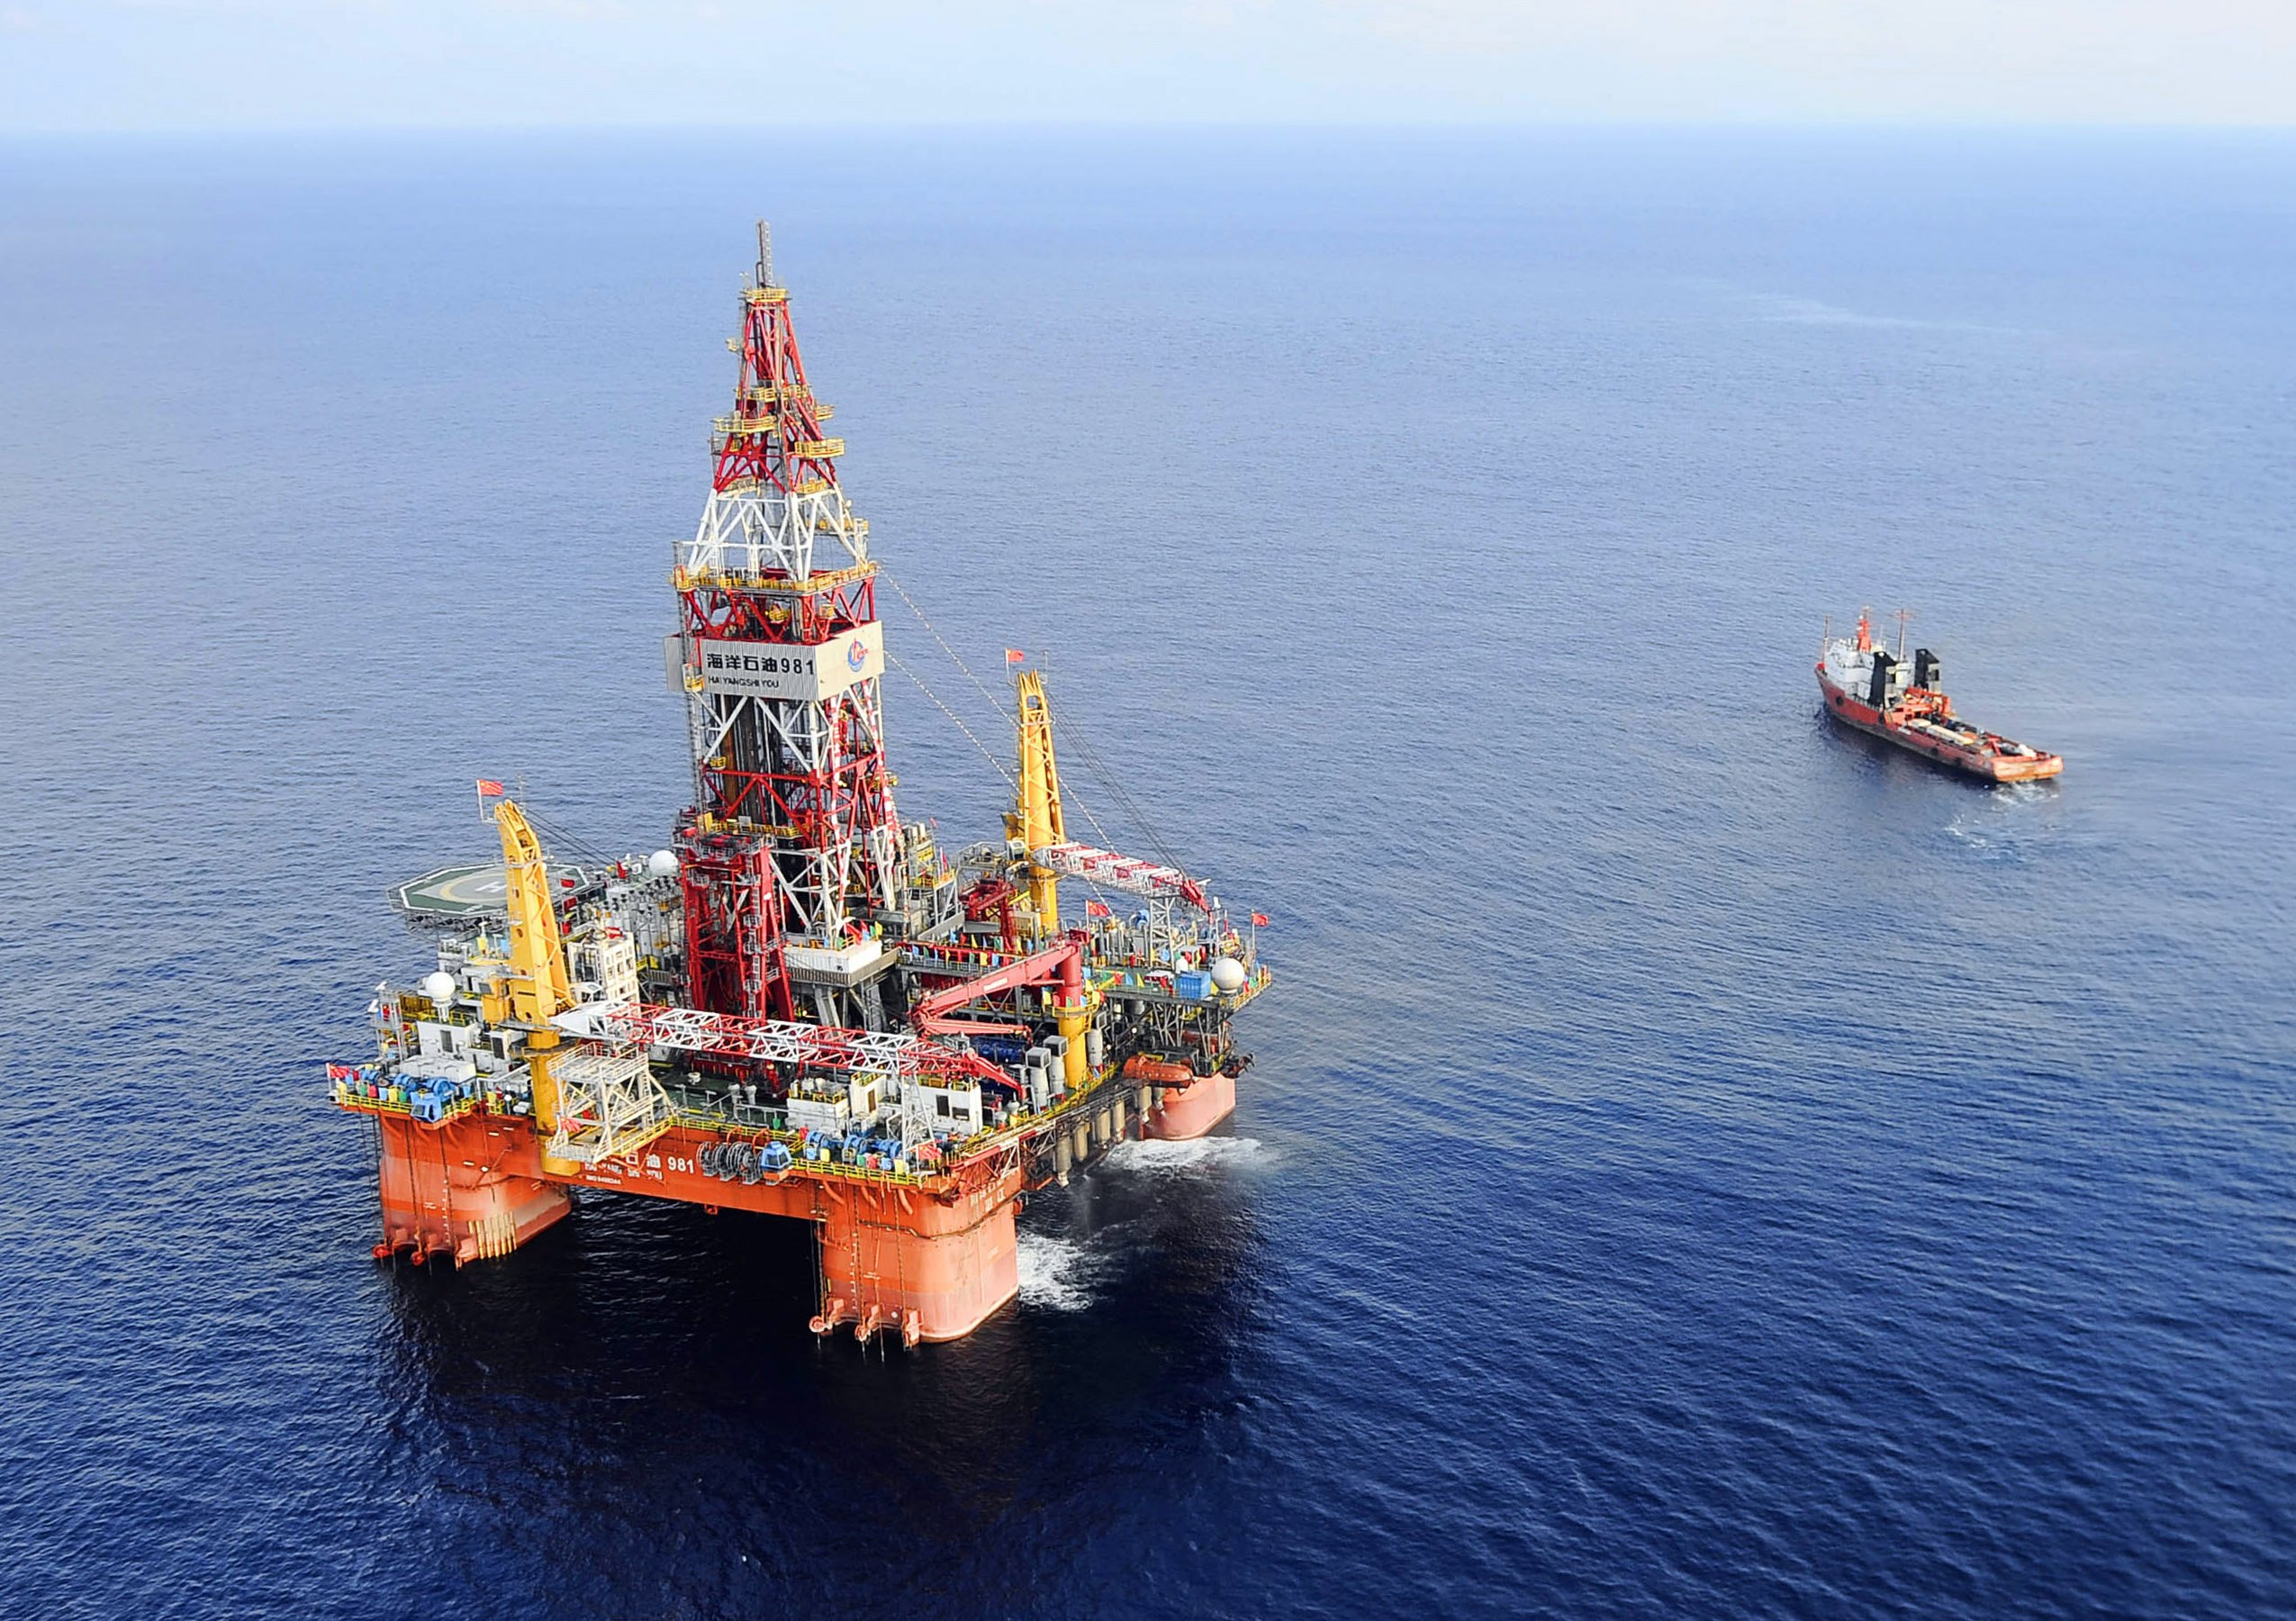 FILE - In this May 7, 2012 file photo released by China's Xinhua News Agency, Haiyang Shiyou oil rig, the first deep-water drilling rig developed in China, is pictured at 320 kilometers (200 miles) southeast of Hong Kong in the South China Sea. Vietnam said on its Foreign Ministry's website late Tuesday, Jan. 19, 2016, China has moved an oil rig into disputed waters in the South China Sea in a move that could result in a repeat the 2014 stand-off between the communist neighbors. (AP Photo/Xinhua, Jin Liangkuai, File) NO SALES